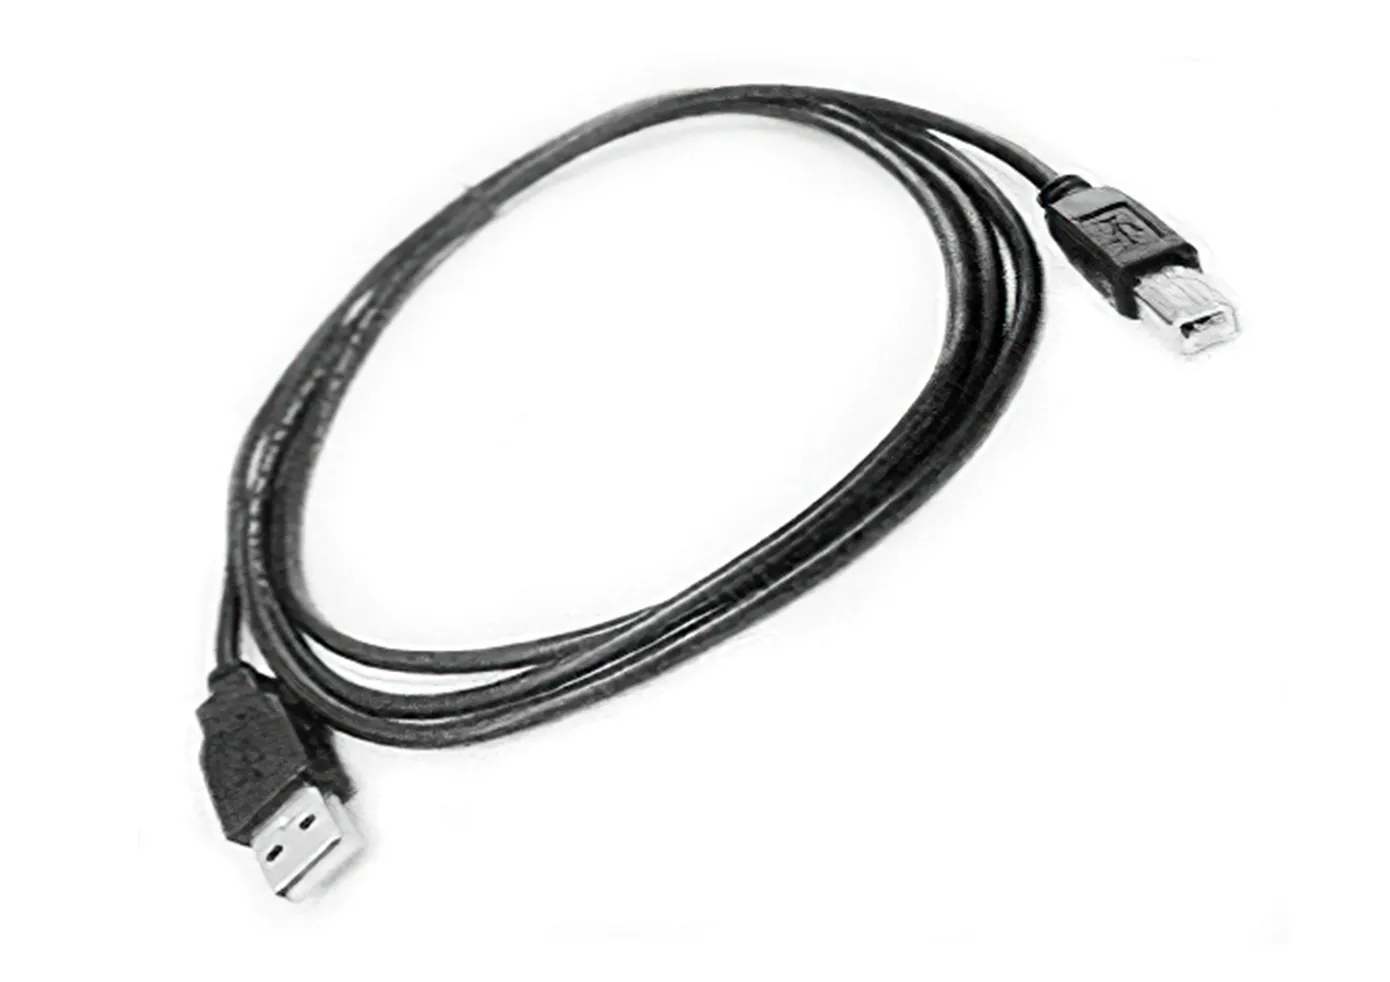 Cable, Configuration, USB, Type A to B, 6'<br/>

<span class="clsSpnProdMdls">For HMC7000 Series only</span>